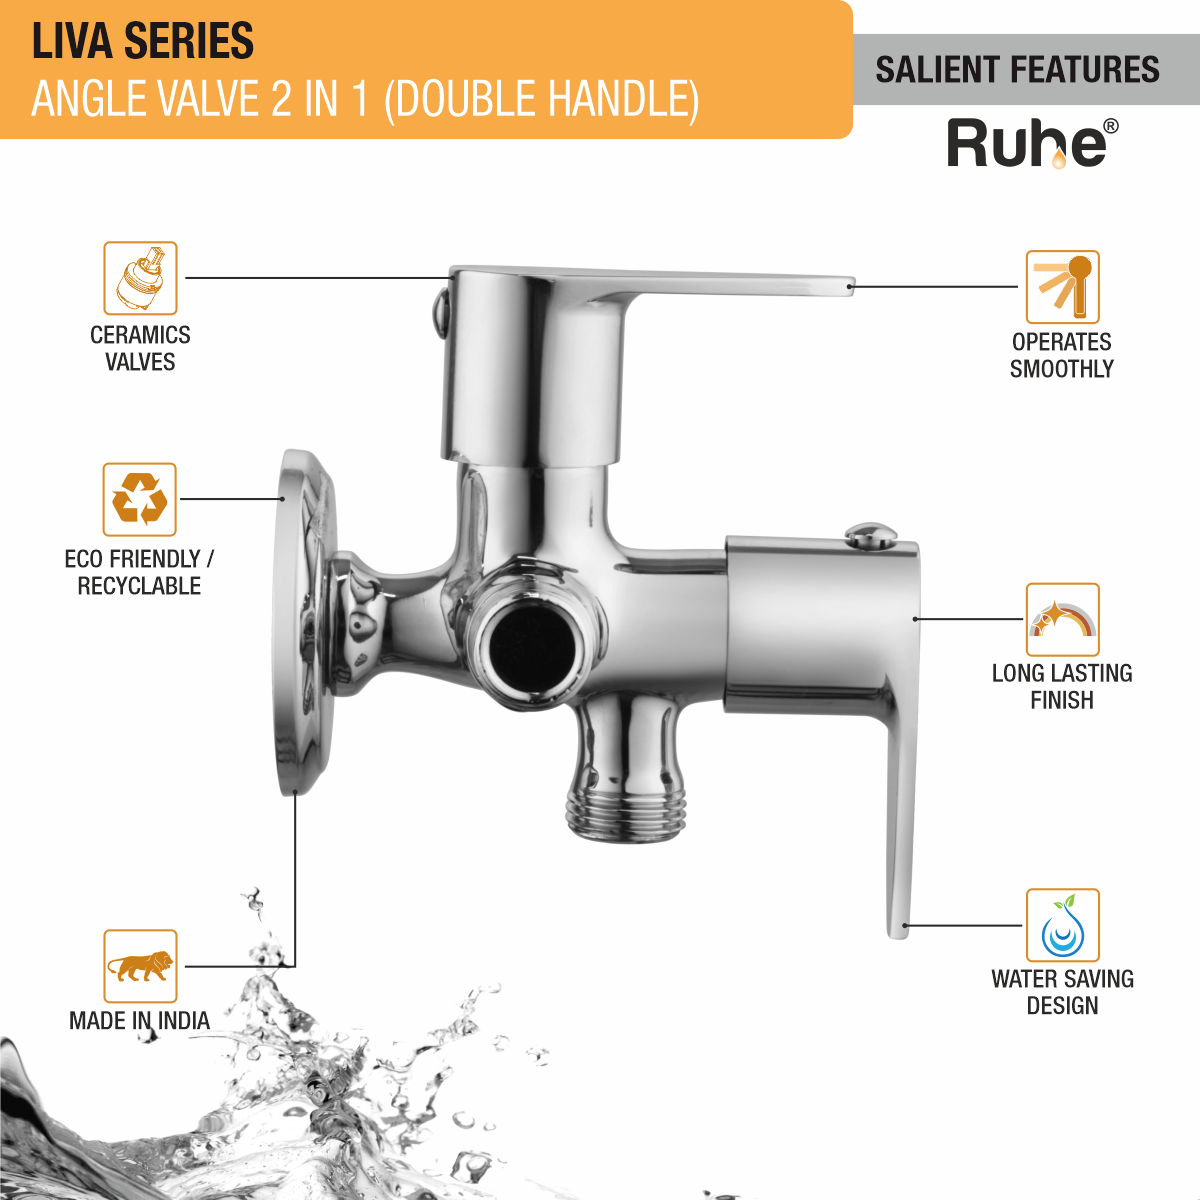 Liva Two Way Angle Valve Brass Faucet (Double Handle) features